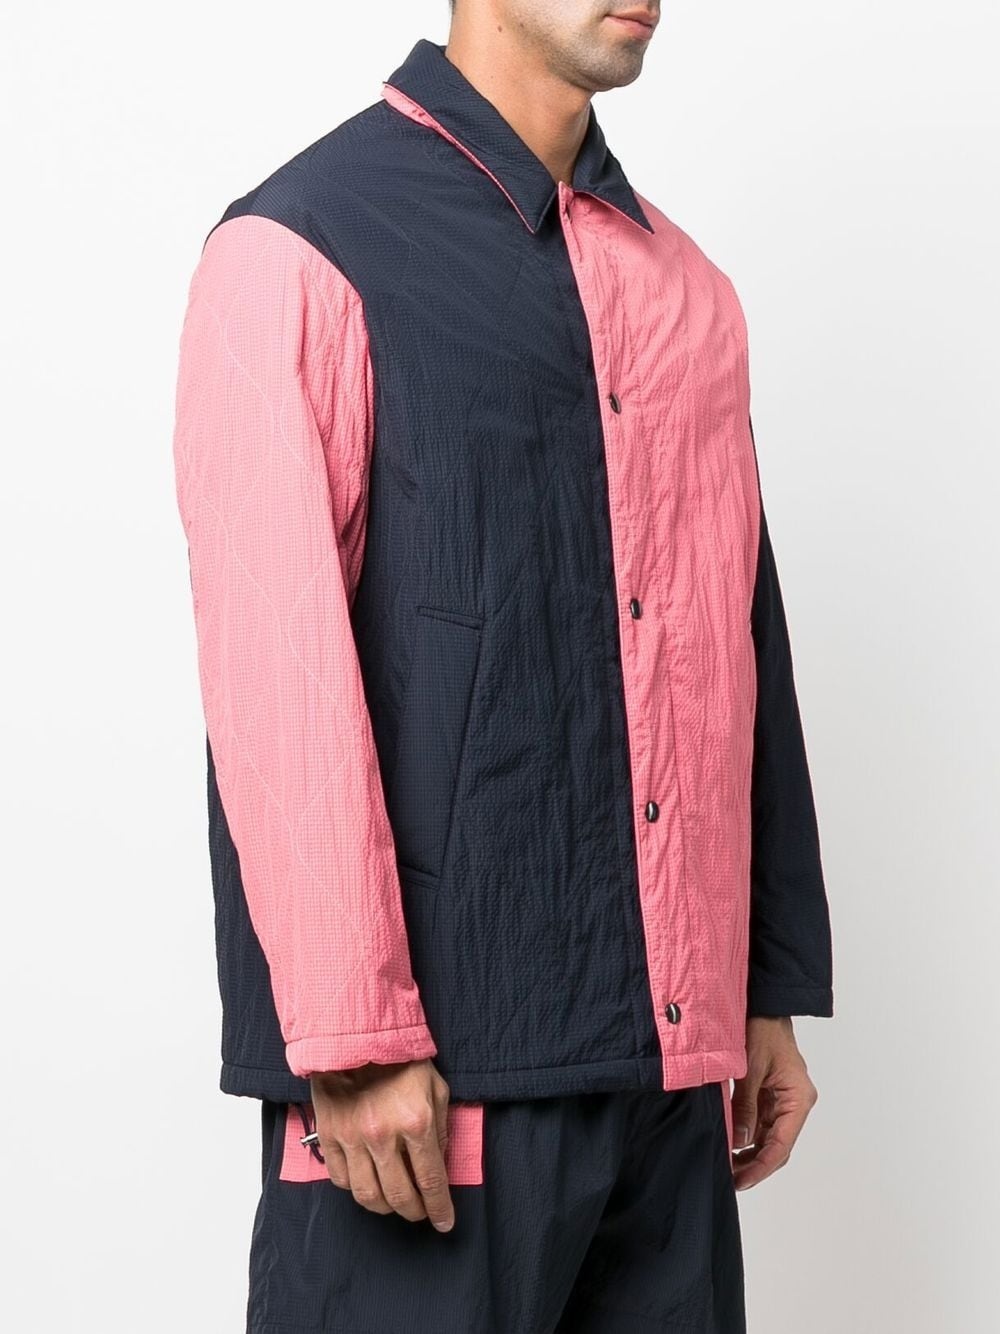 padded diamond-quilted shirt-jacket - 3